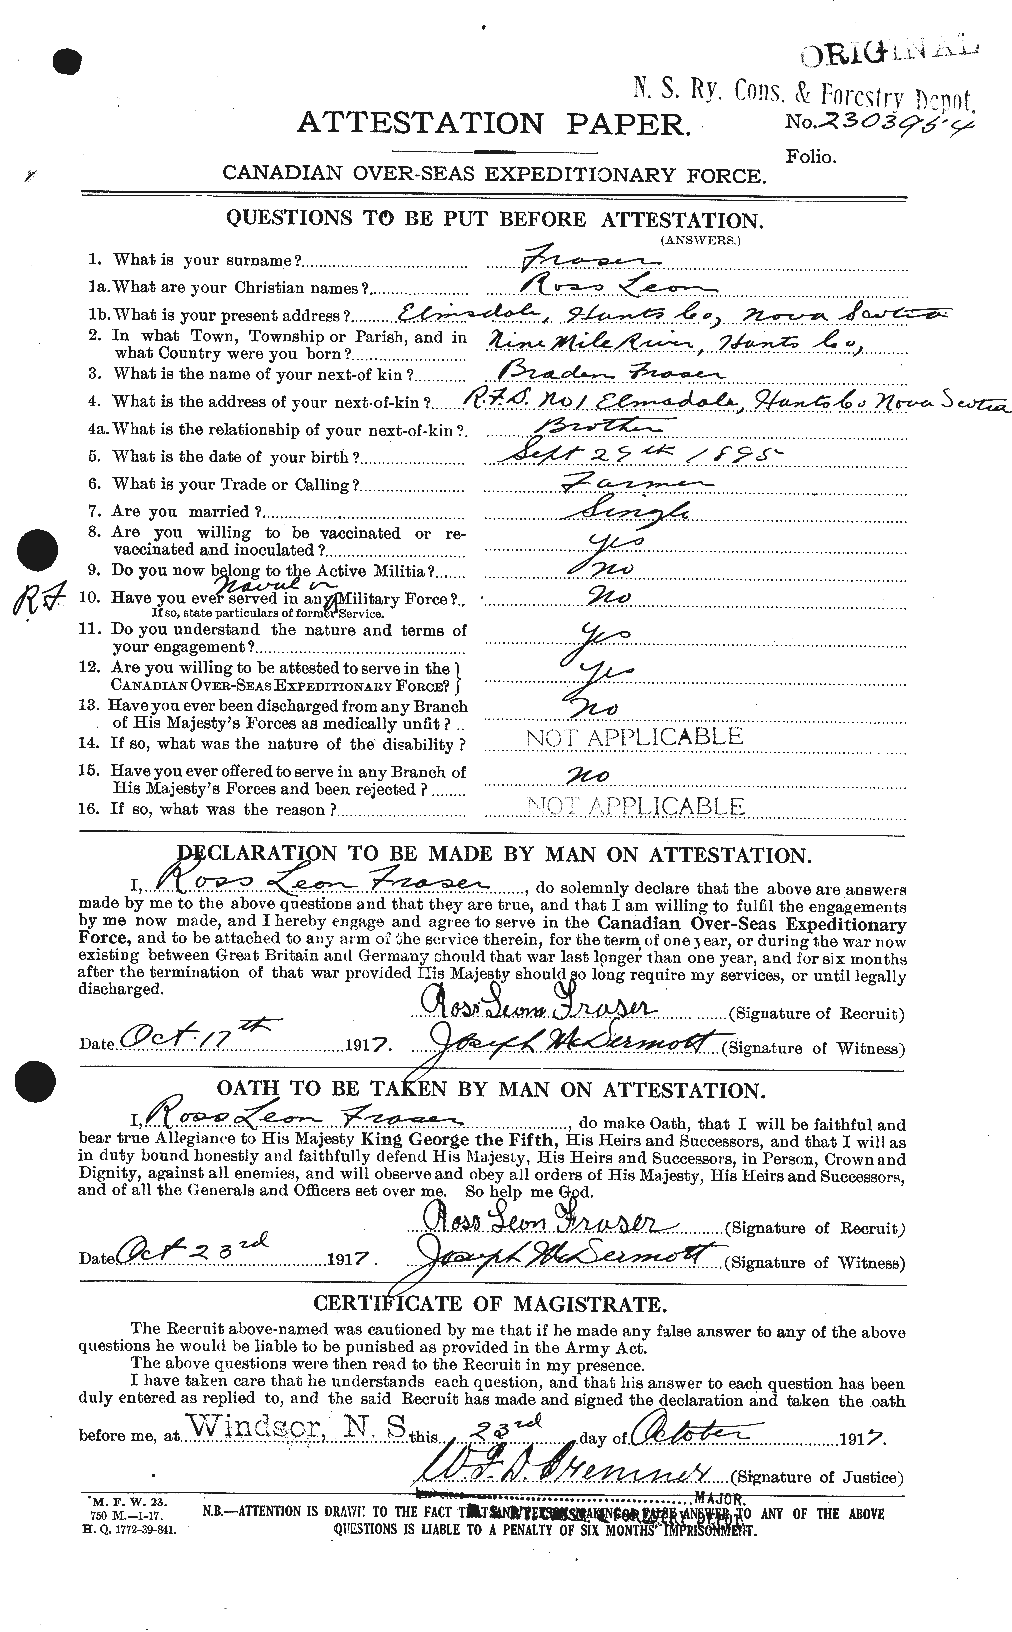 Personnel Records of the First World War - CEF 335703a